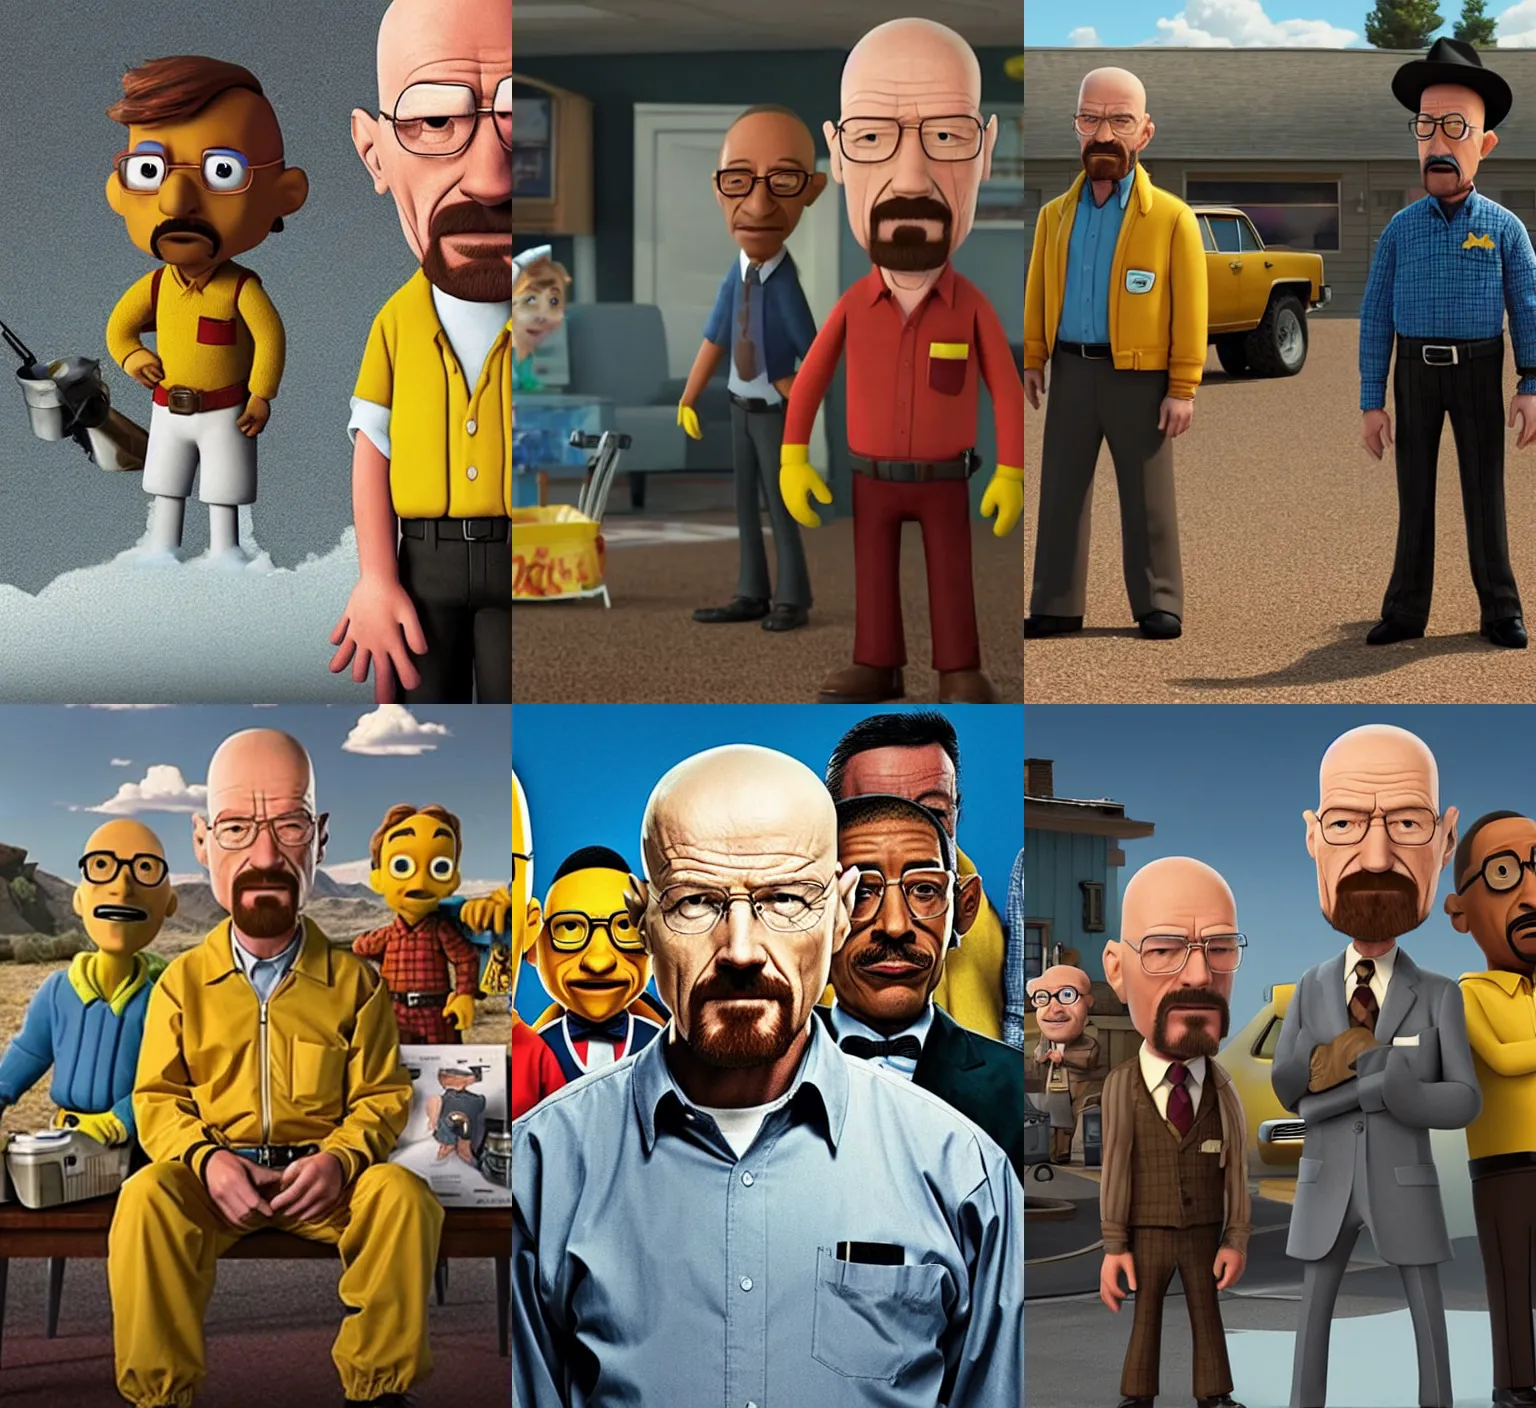 Prompt: walter white from breaking bad is in the pixar movie, standing together with gustavo fring, pixar style, movie poster